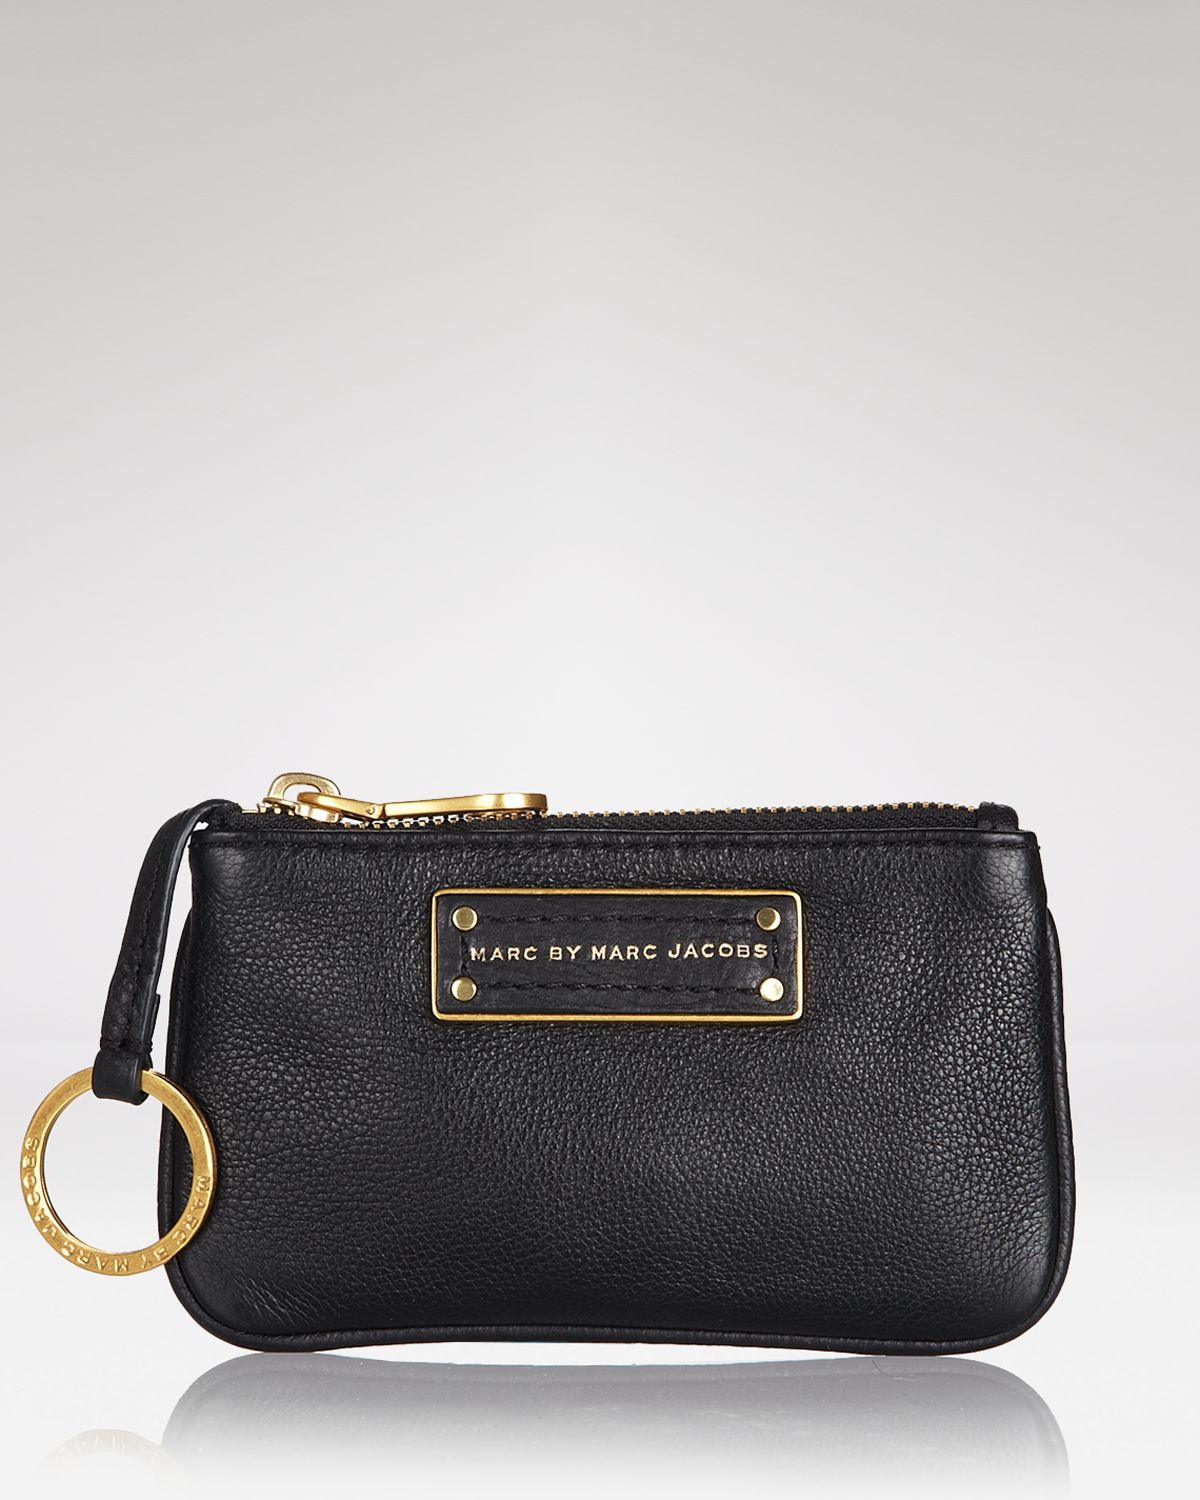 Marc By Marc Jacobs Key Pouch - Too Hot To Handle in Black | Lyst